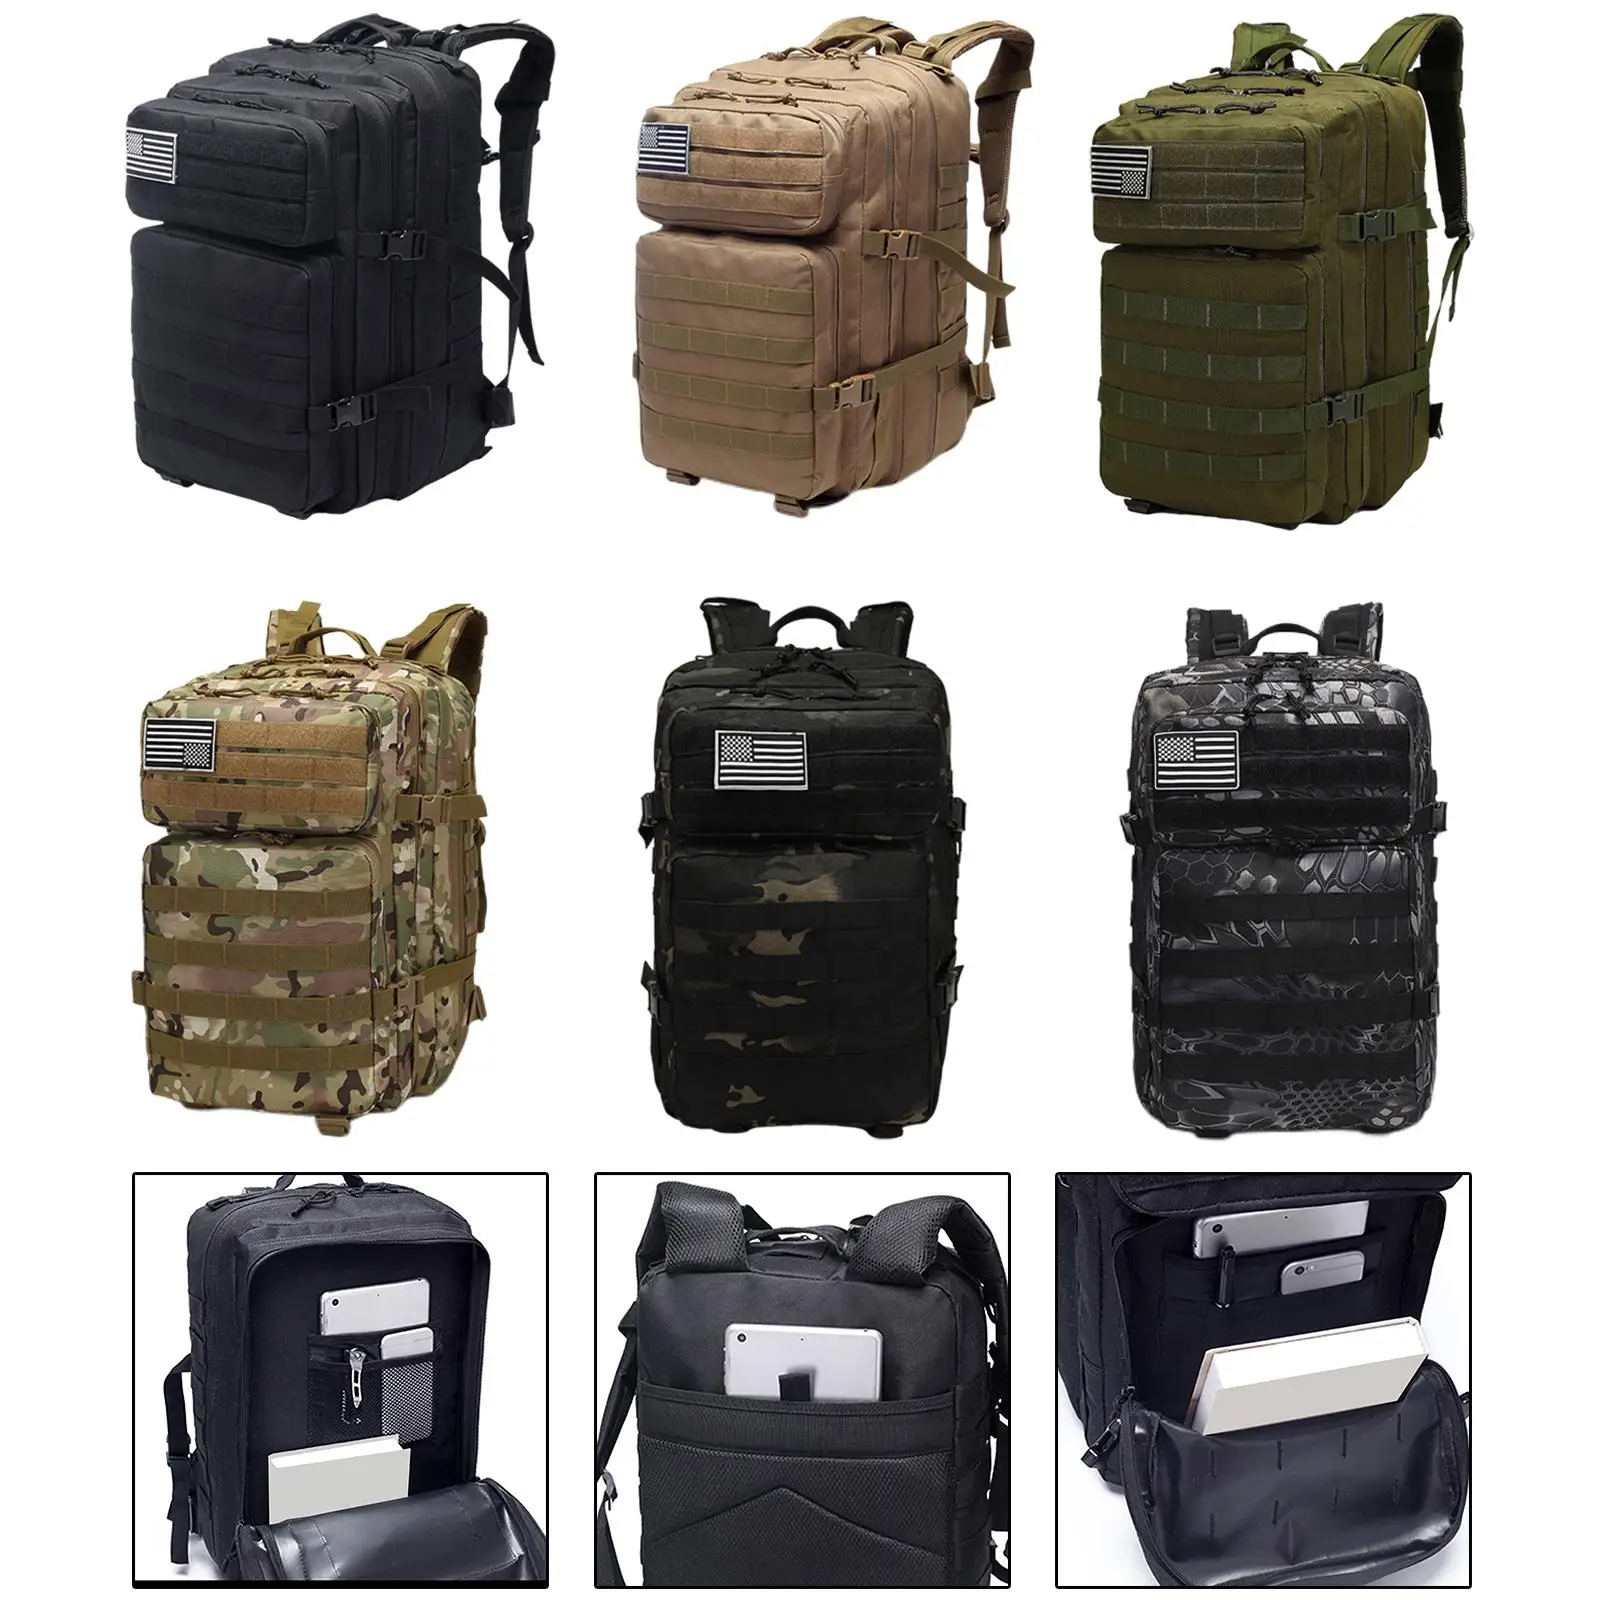 Large Tactical Backpack Hiking Rucksack Day Pack Adjustable Survival Outdoor Mountaineering Bag Pack School Climbing Equipment